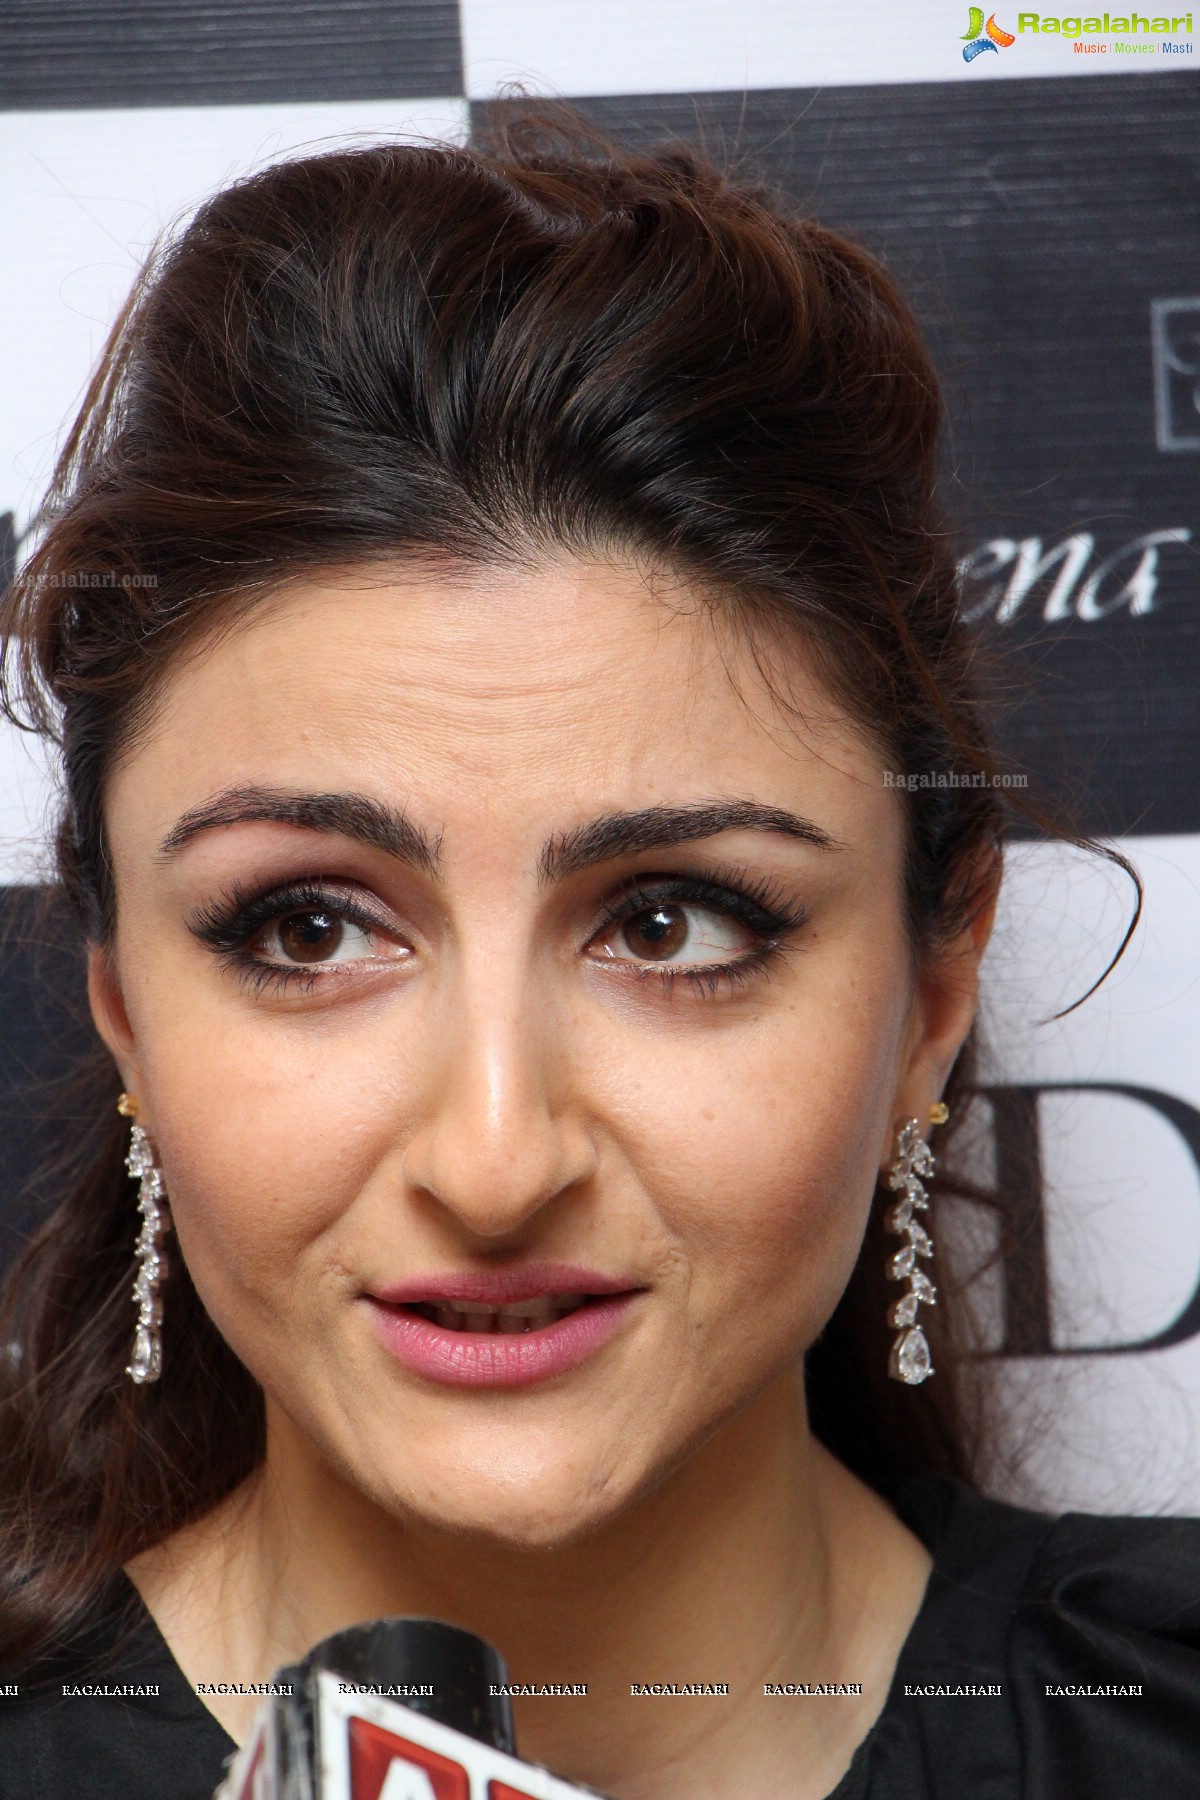 Soha Ali Khan launches The Dior VIII Montaigne Collection in Hyderabad